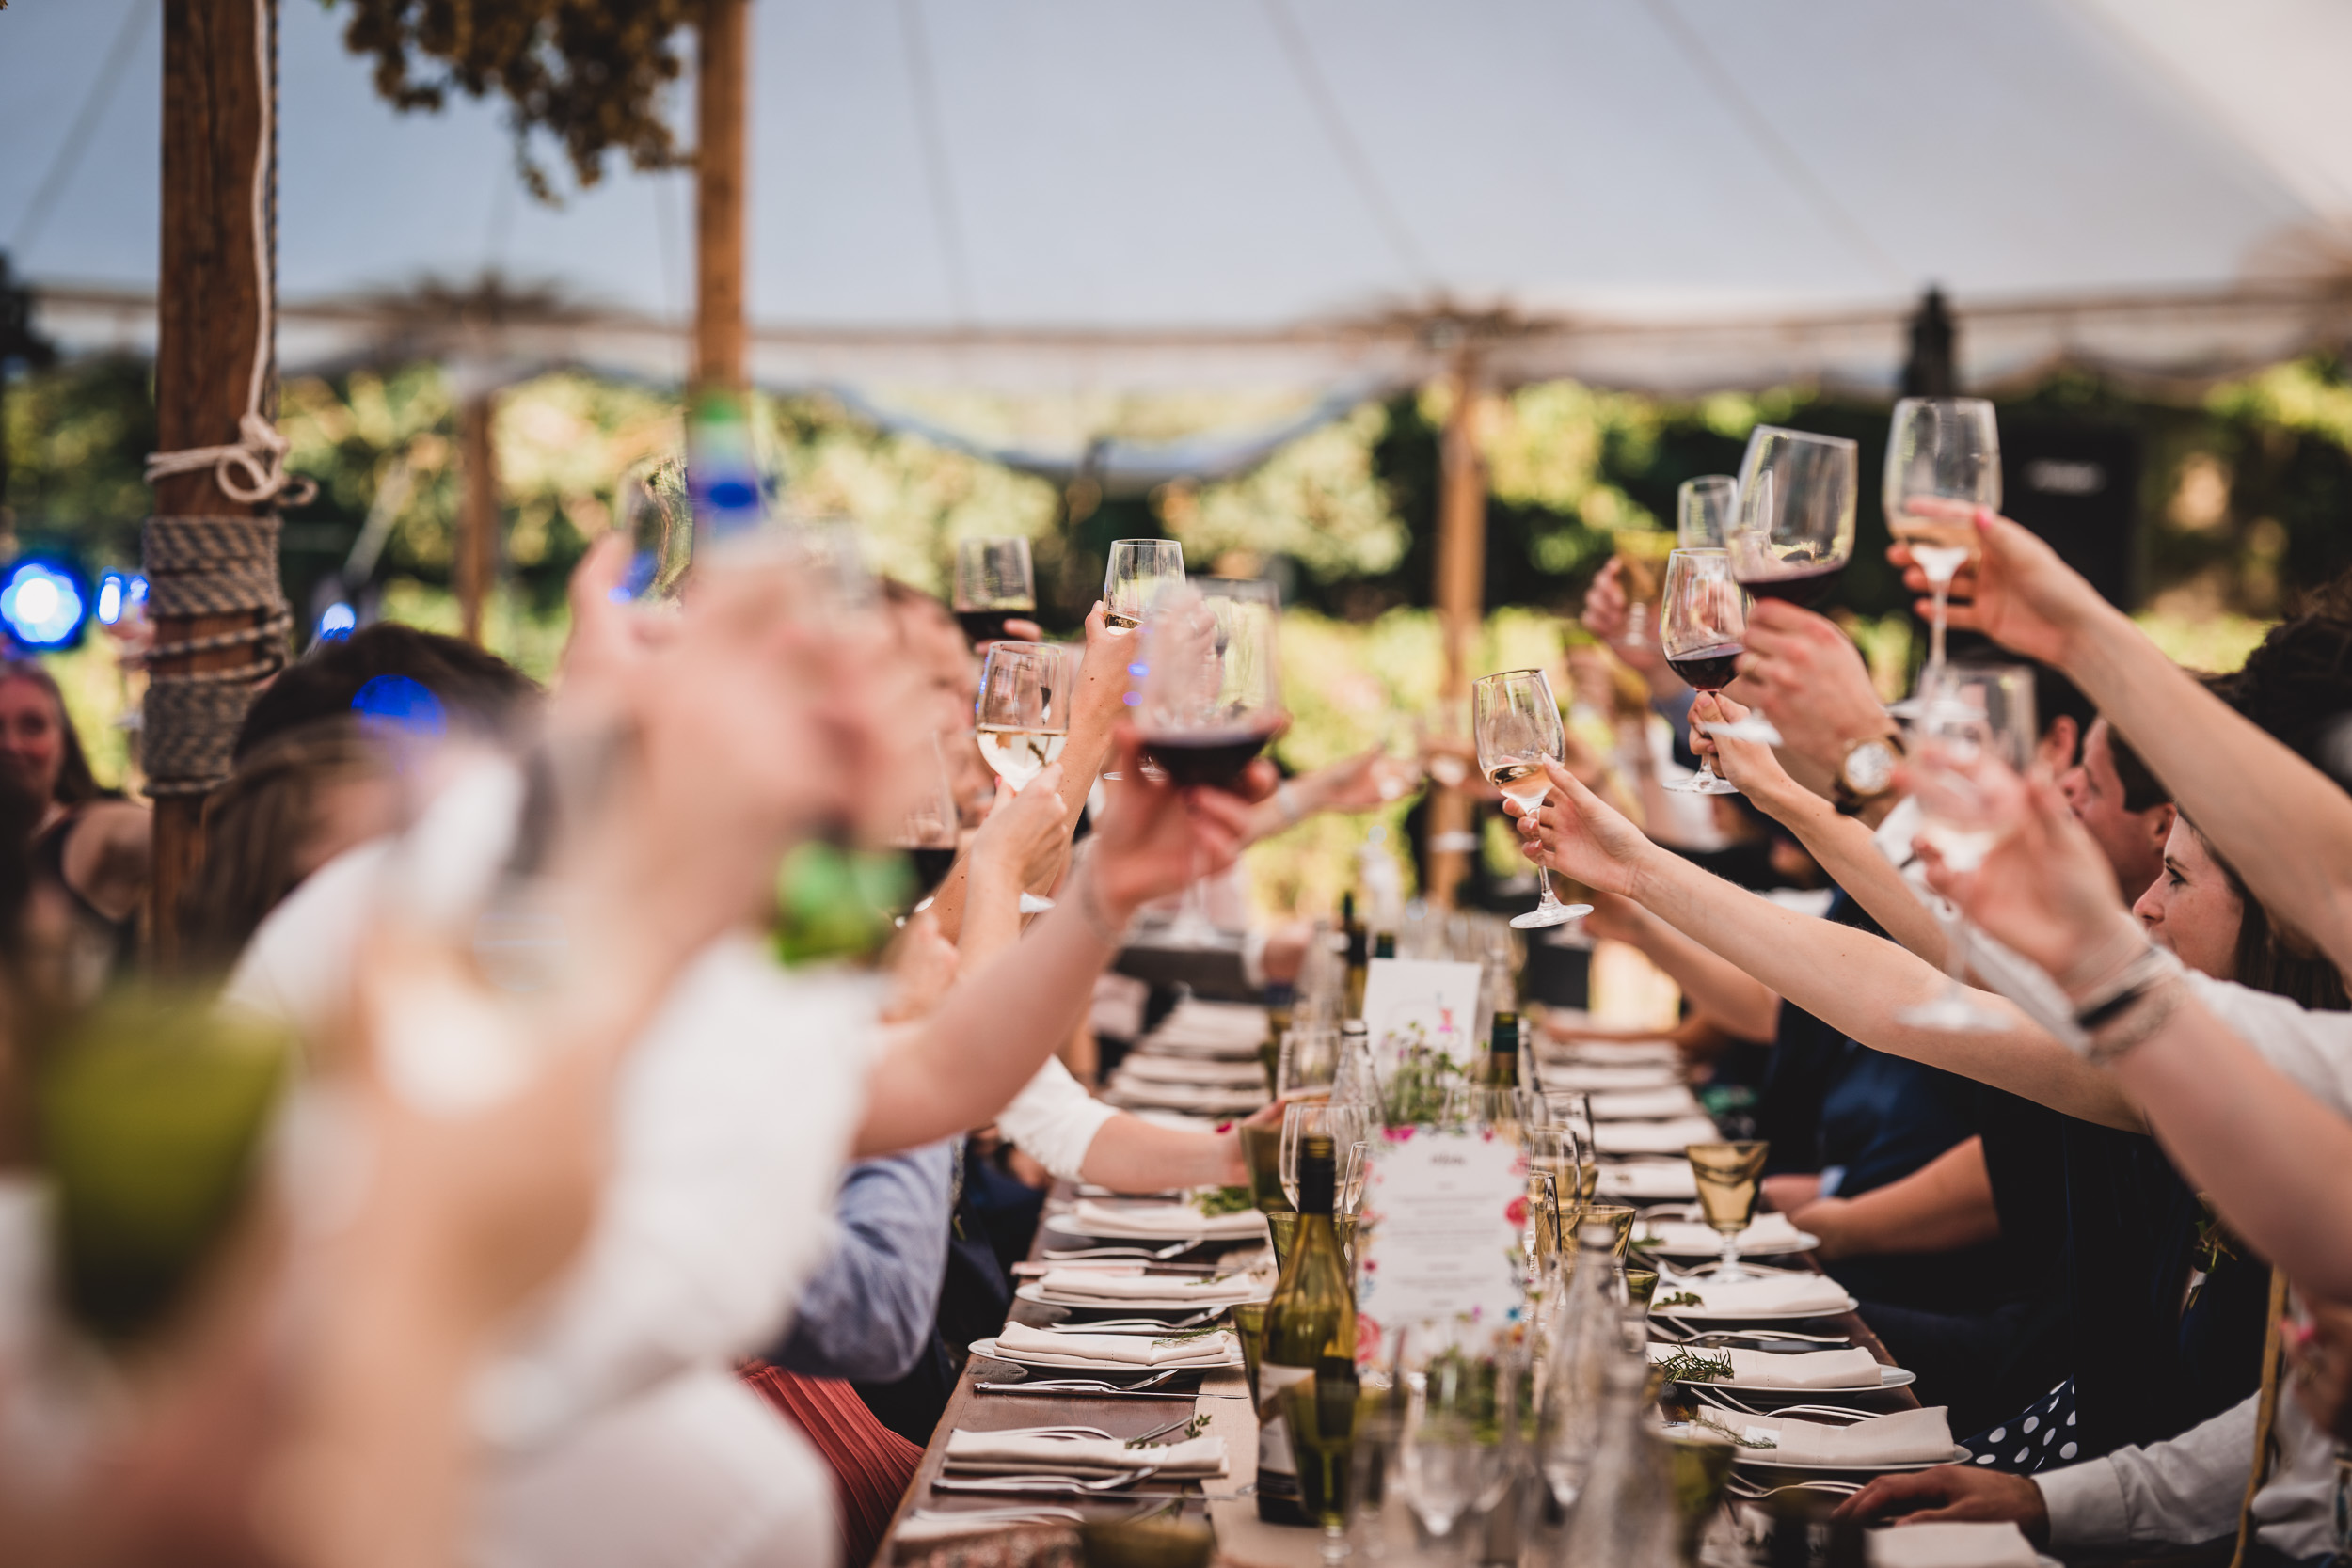 A group of people toasting at a wedding dinner party.